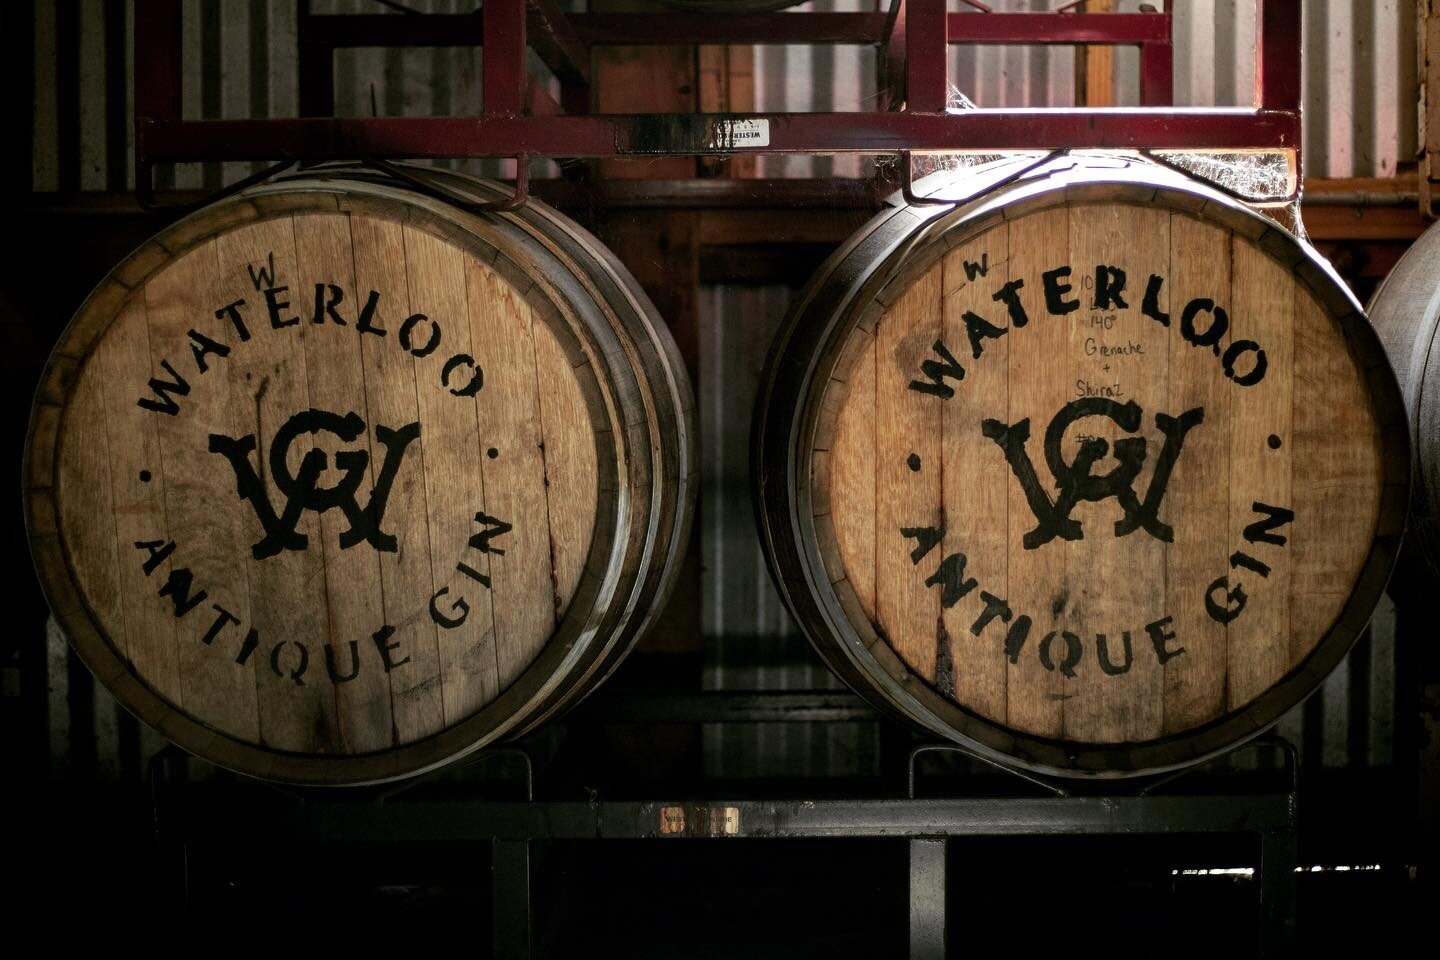 Made in Texas, Aged in Texas.

Aged in first-use White American Oak barrels for two years on our ranch, Waterloo Antique Gin is an expression with true Texas roots. 

Discover the taste of Waterloo Antique Gin - order online or find us in a store nea